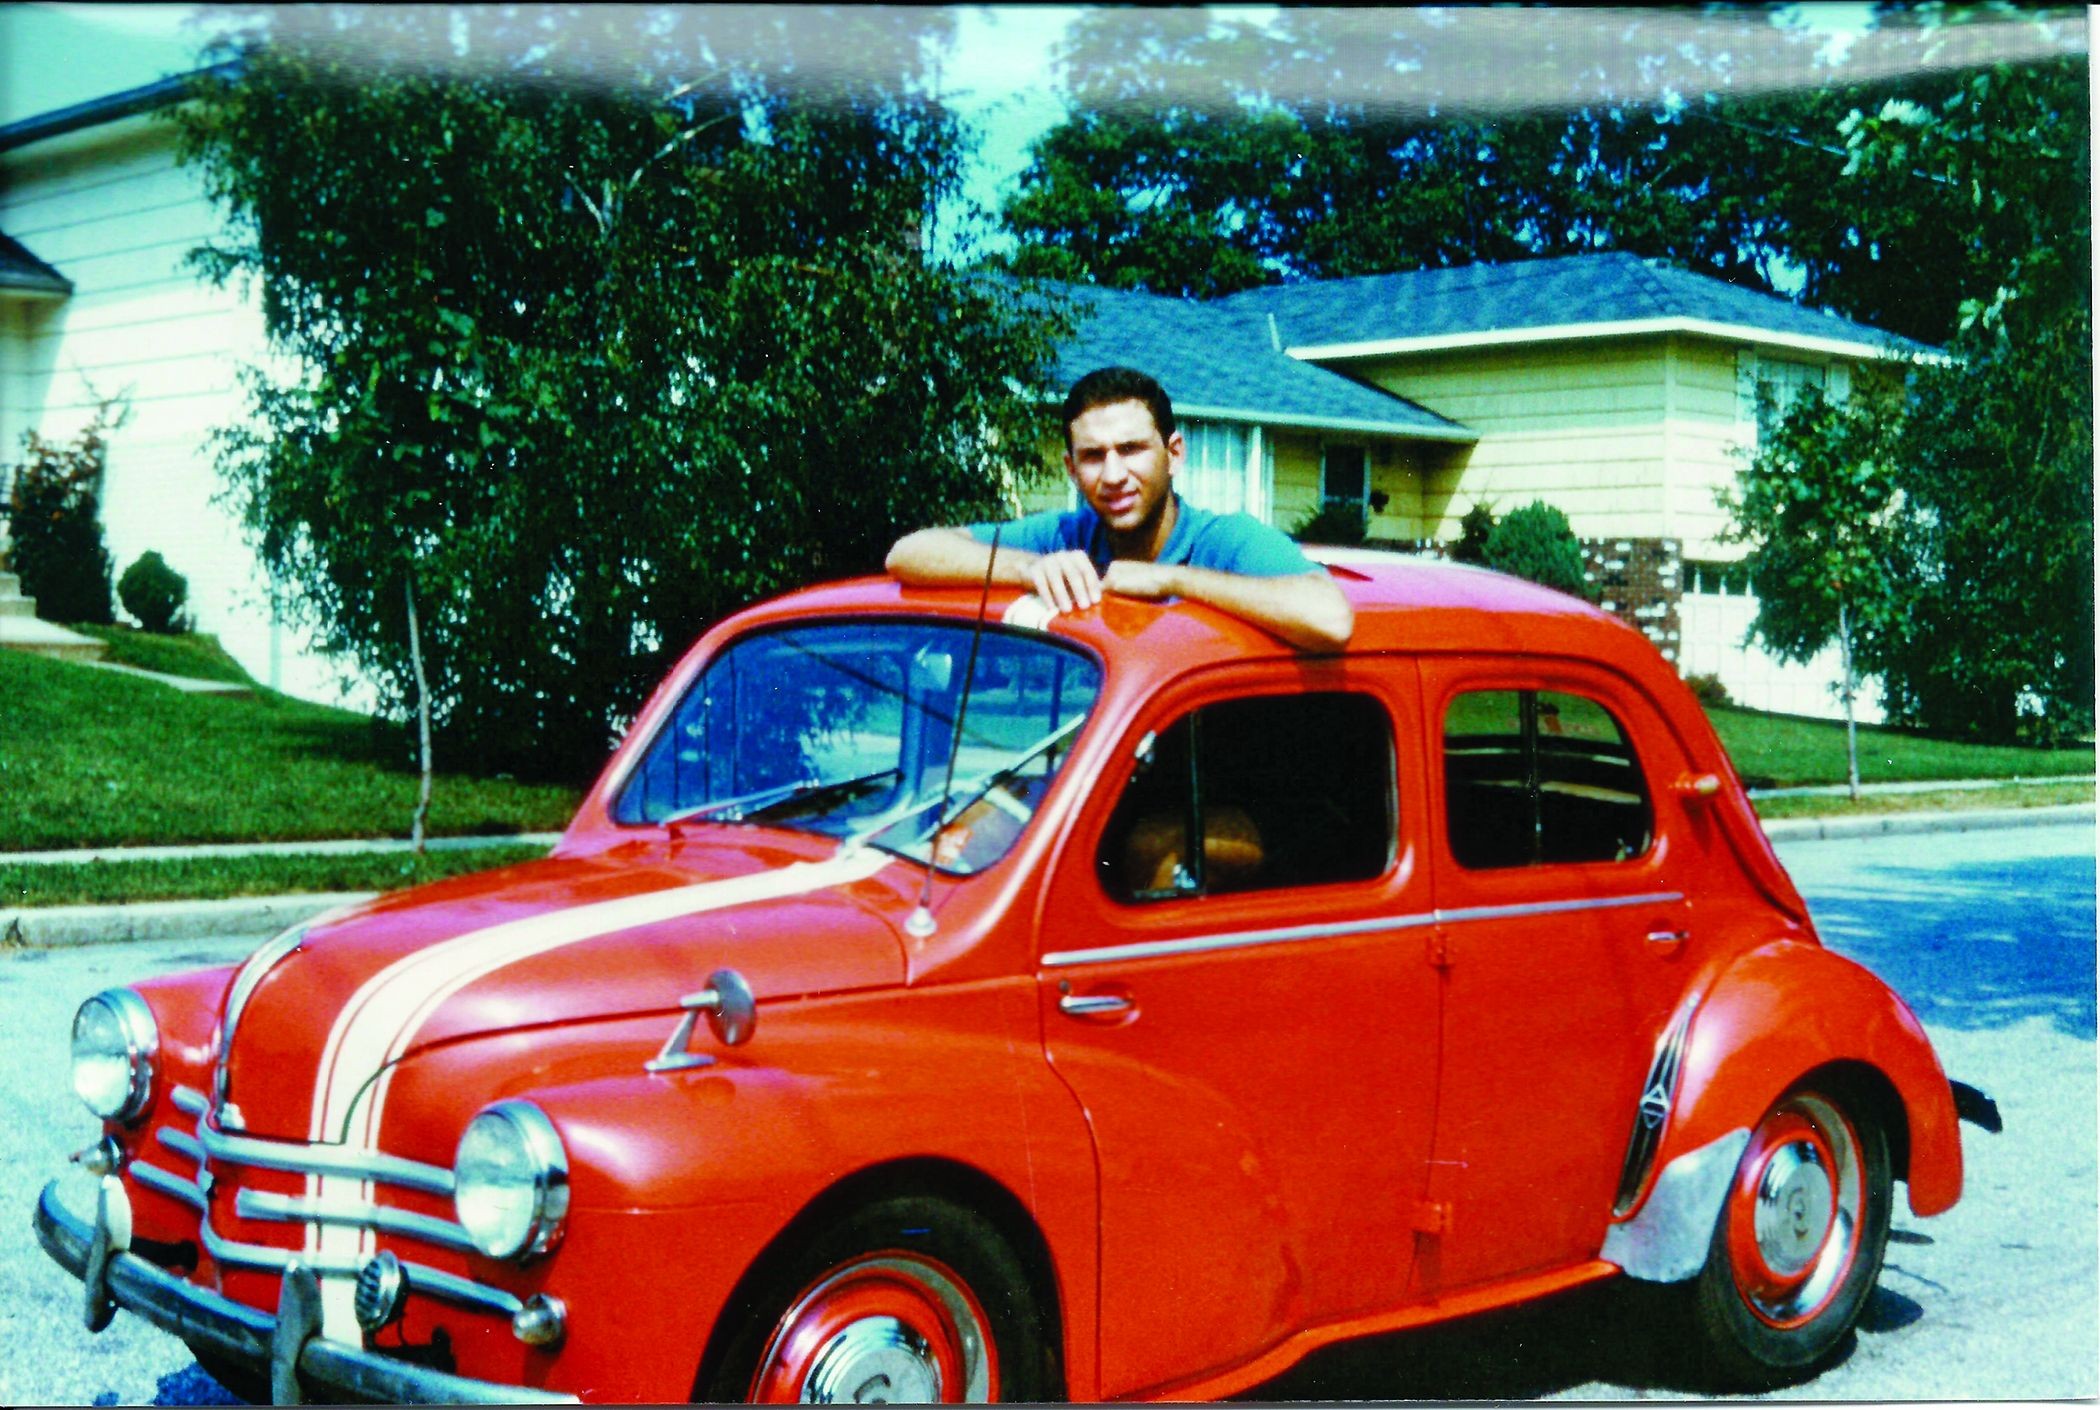 My First Car was a 1959 Renault 4CV